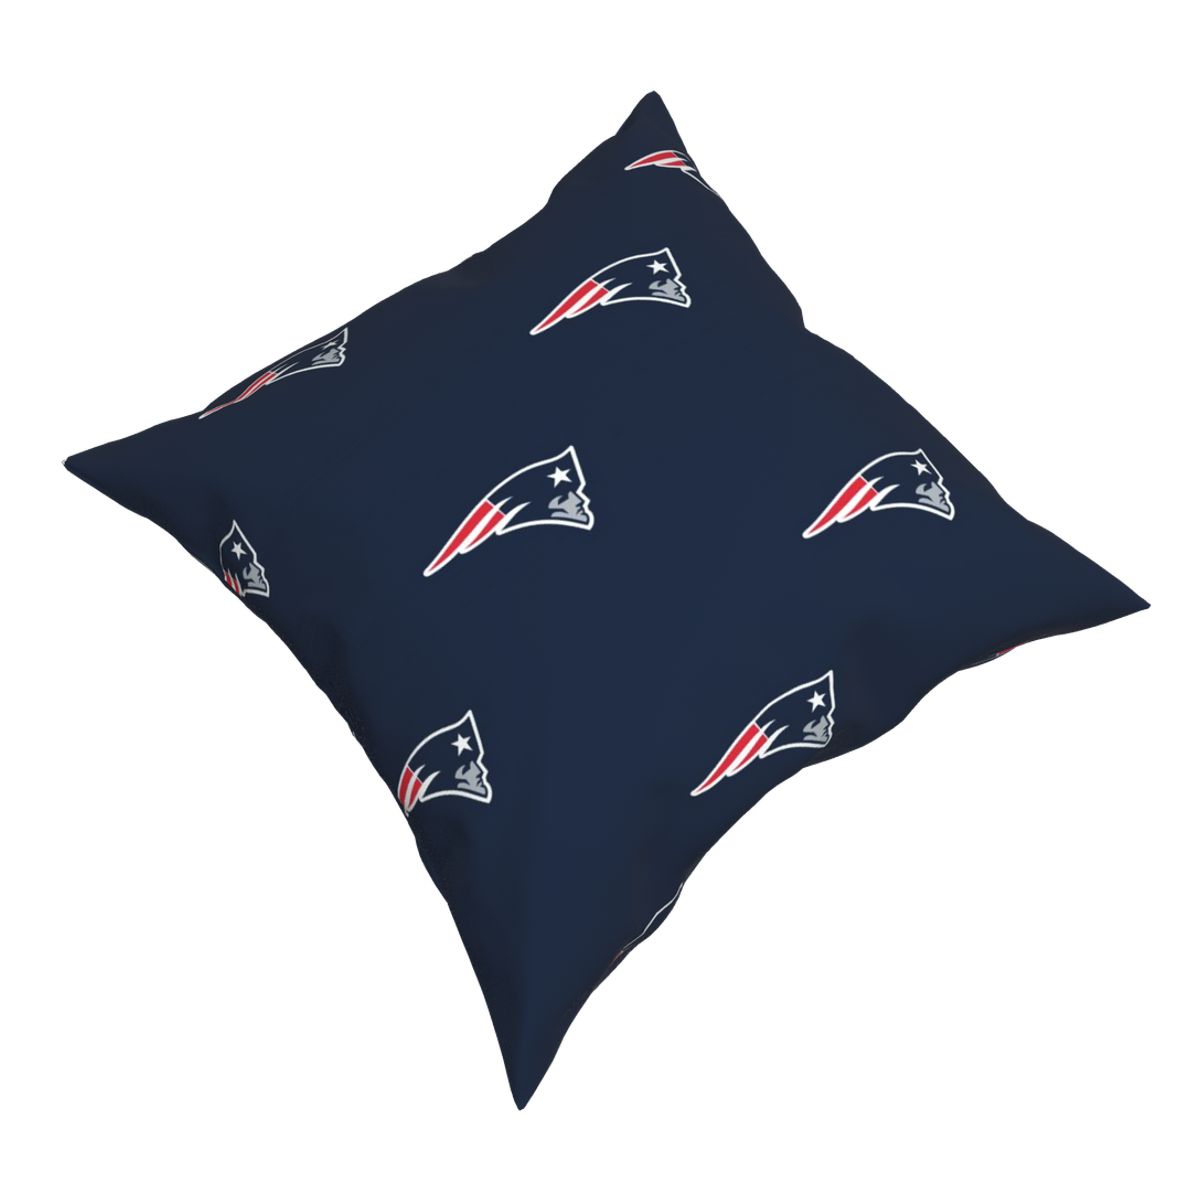 Custom Decorative Football Pillow Case New England Patriots Pillowcase Personalized Throw Pillow Covers